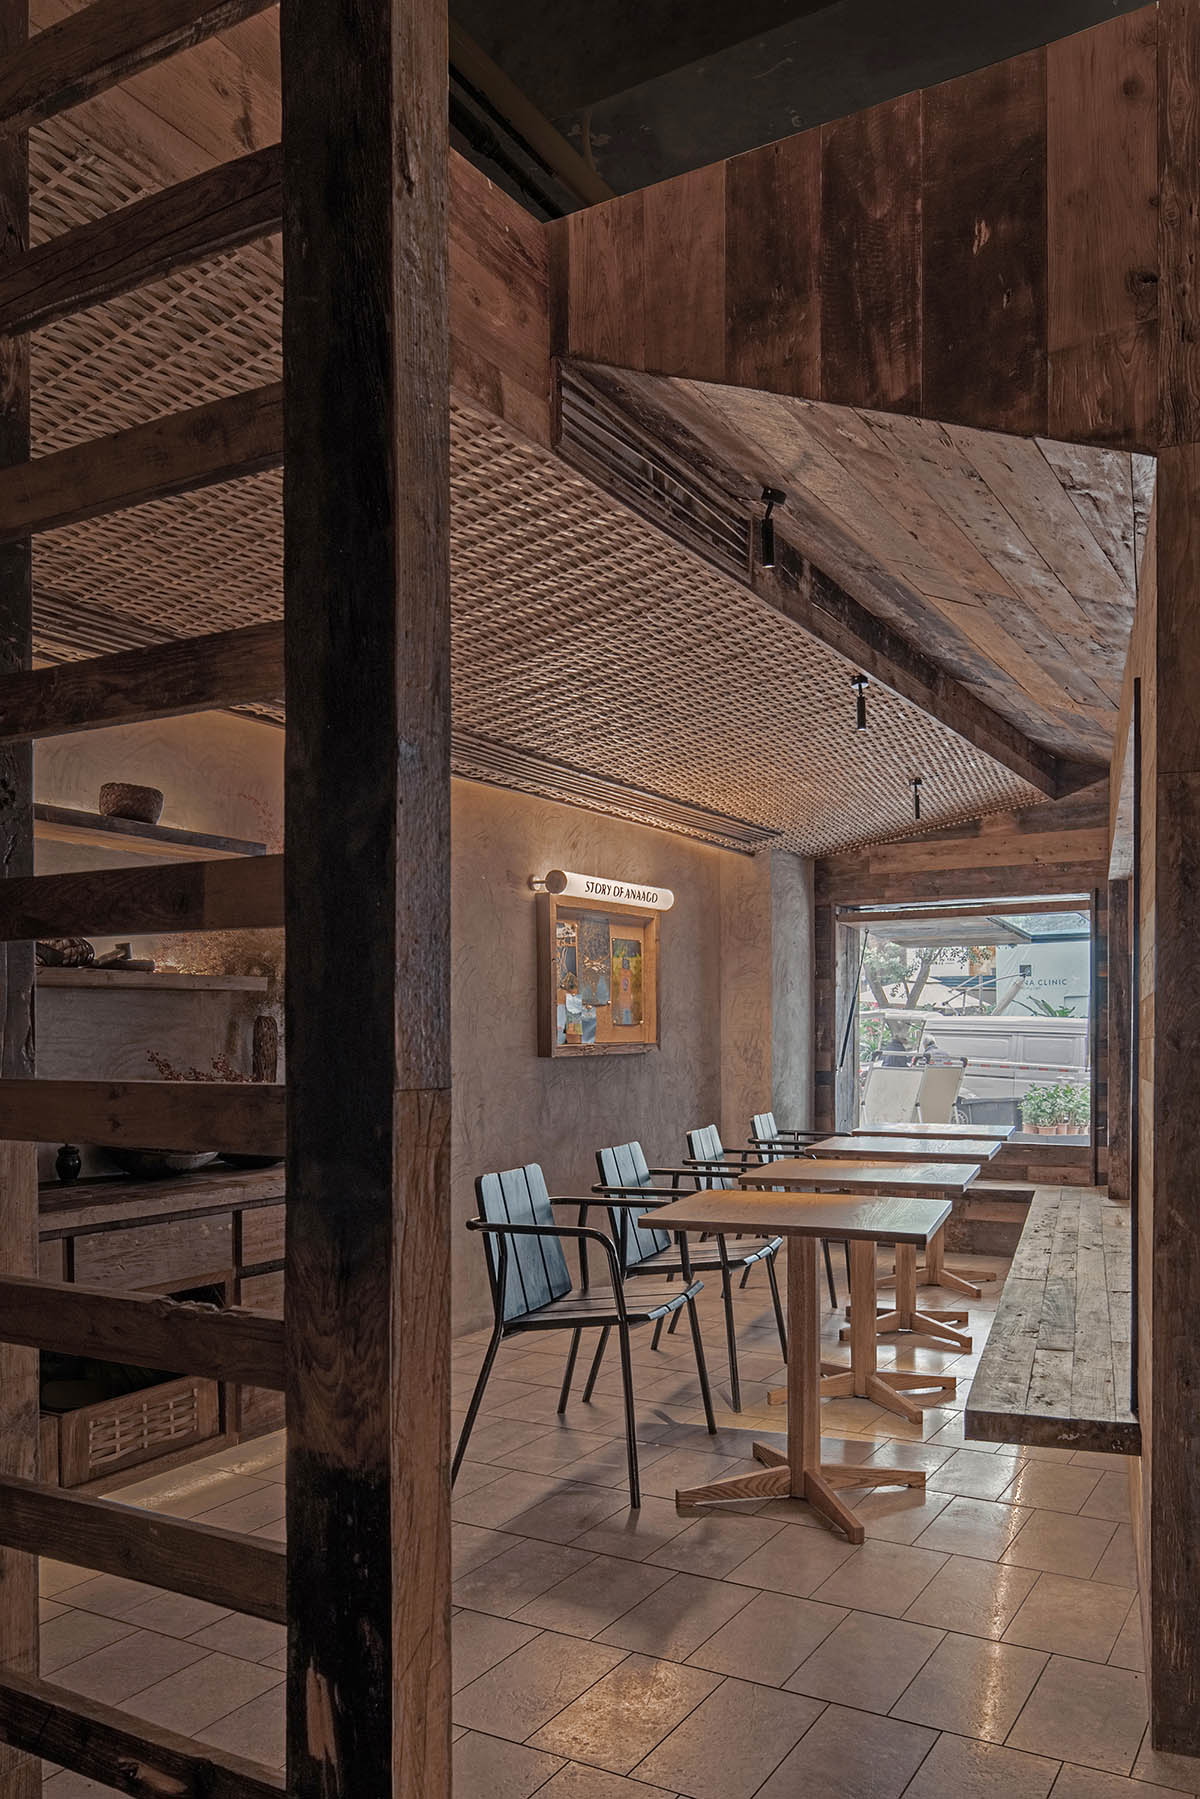 Vari Architectural Design built Anaago Bistro with bamboo-woven private rooms in China 